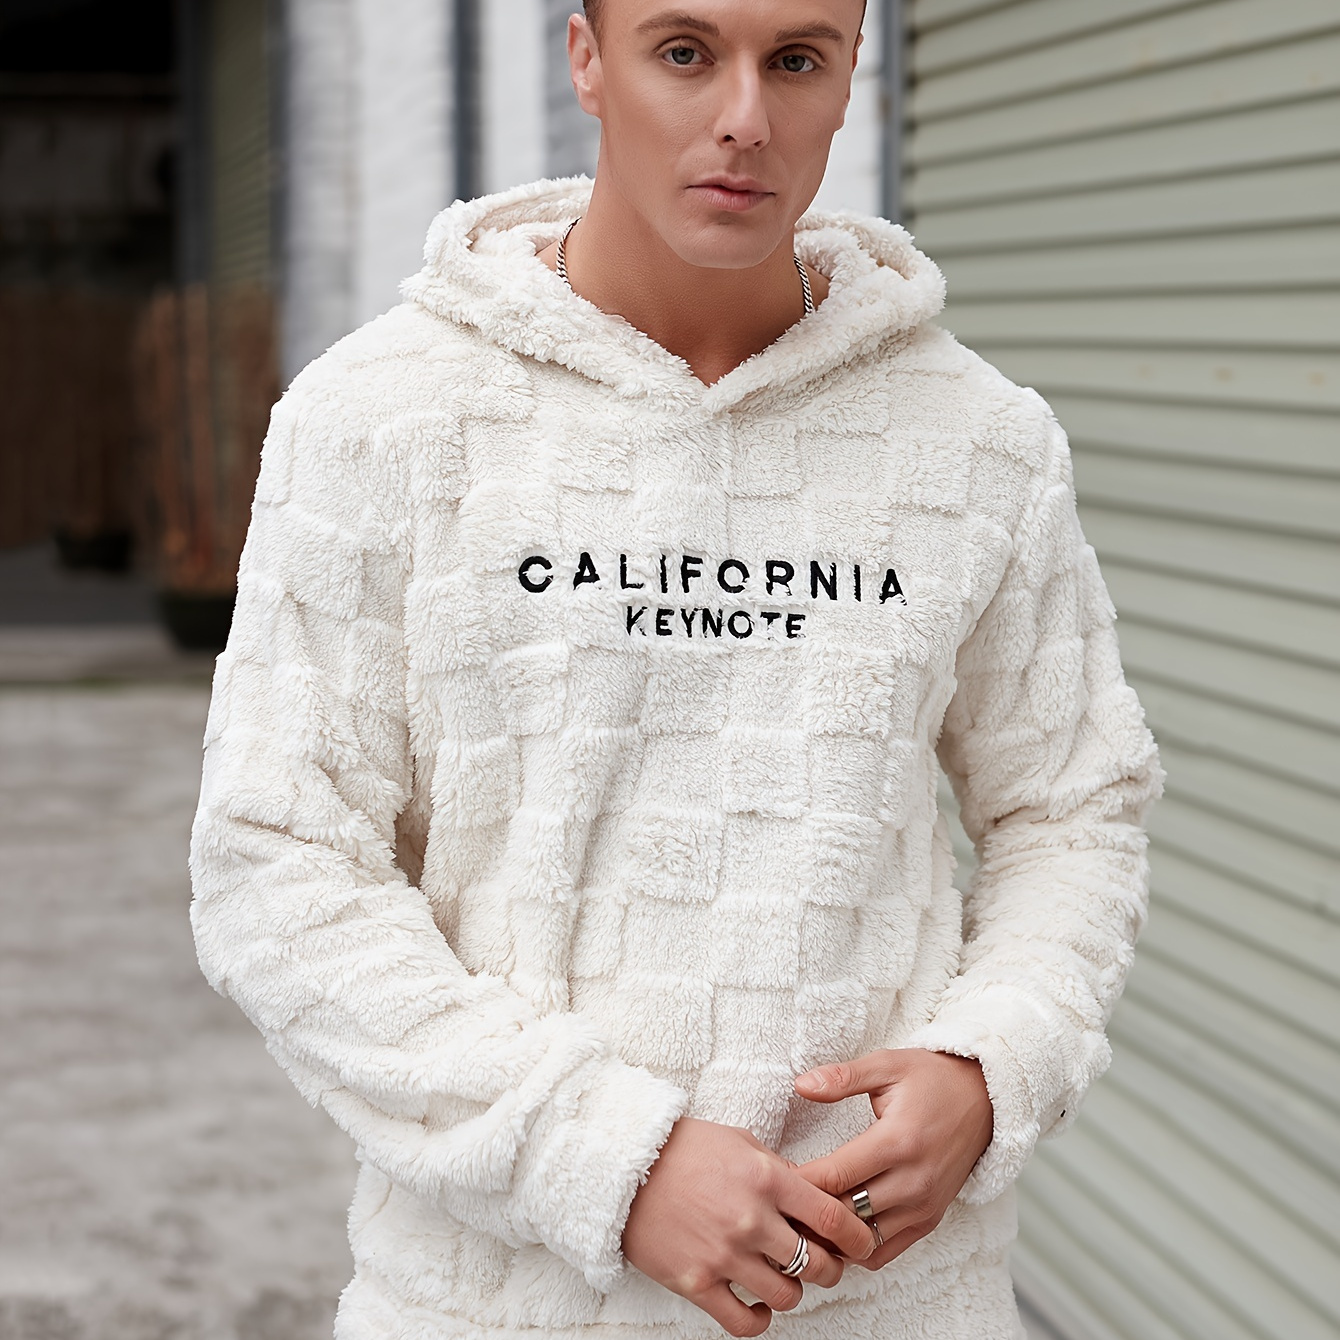 

Chic Design Men's Plaid Pattern And Textured Hooded Sweatshirt With "california " Letter Embroidery, Trendy Fleece Hoodie For Daily Outerwear